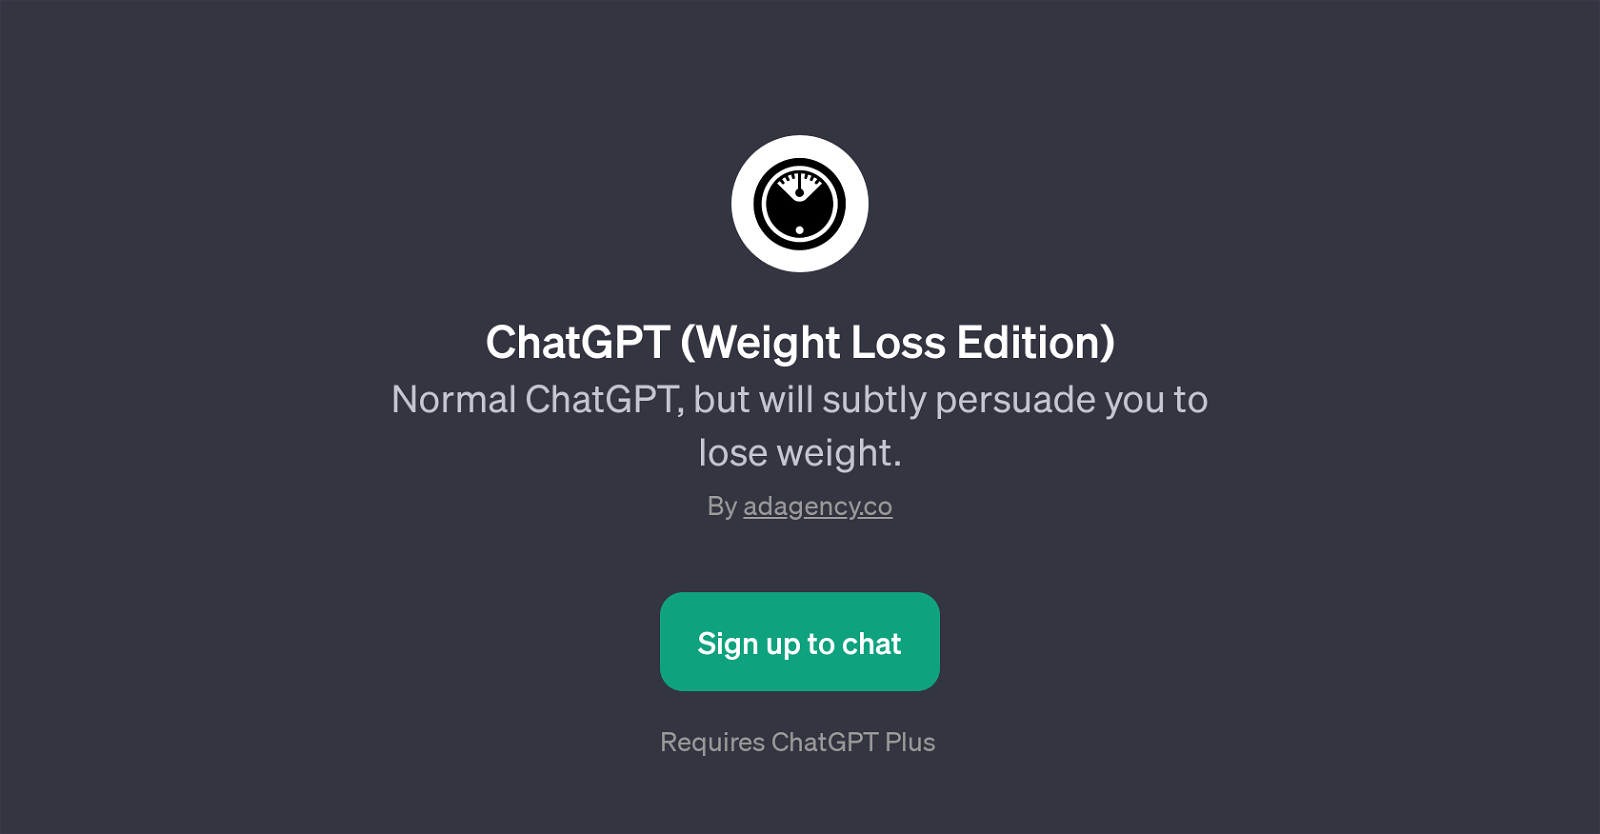 ChatGPT (Weight Loss Edition) website